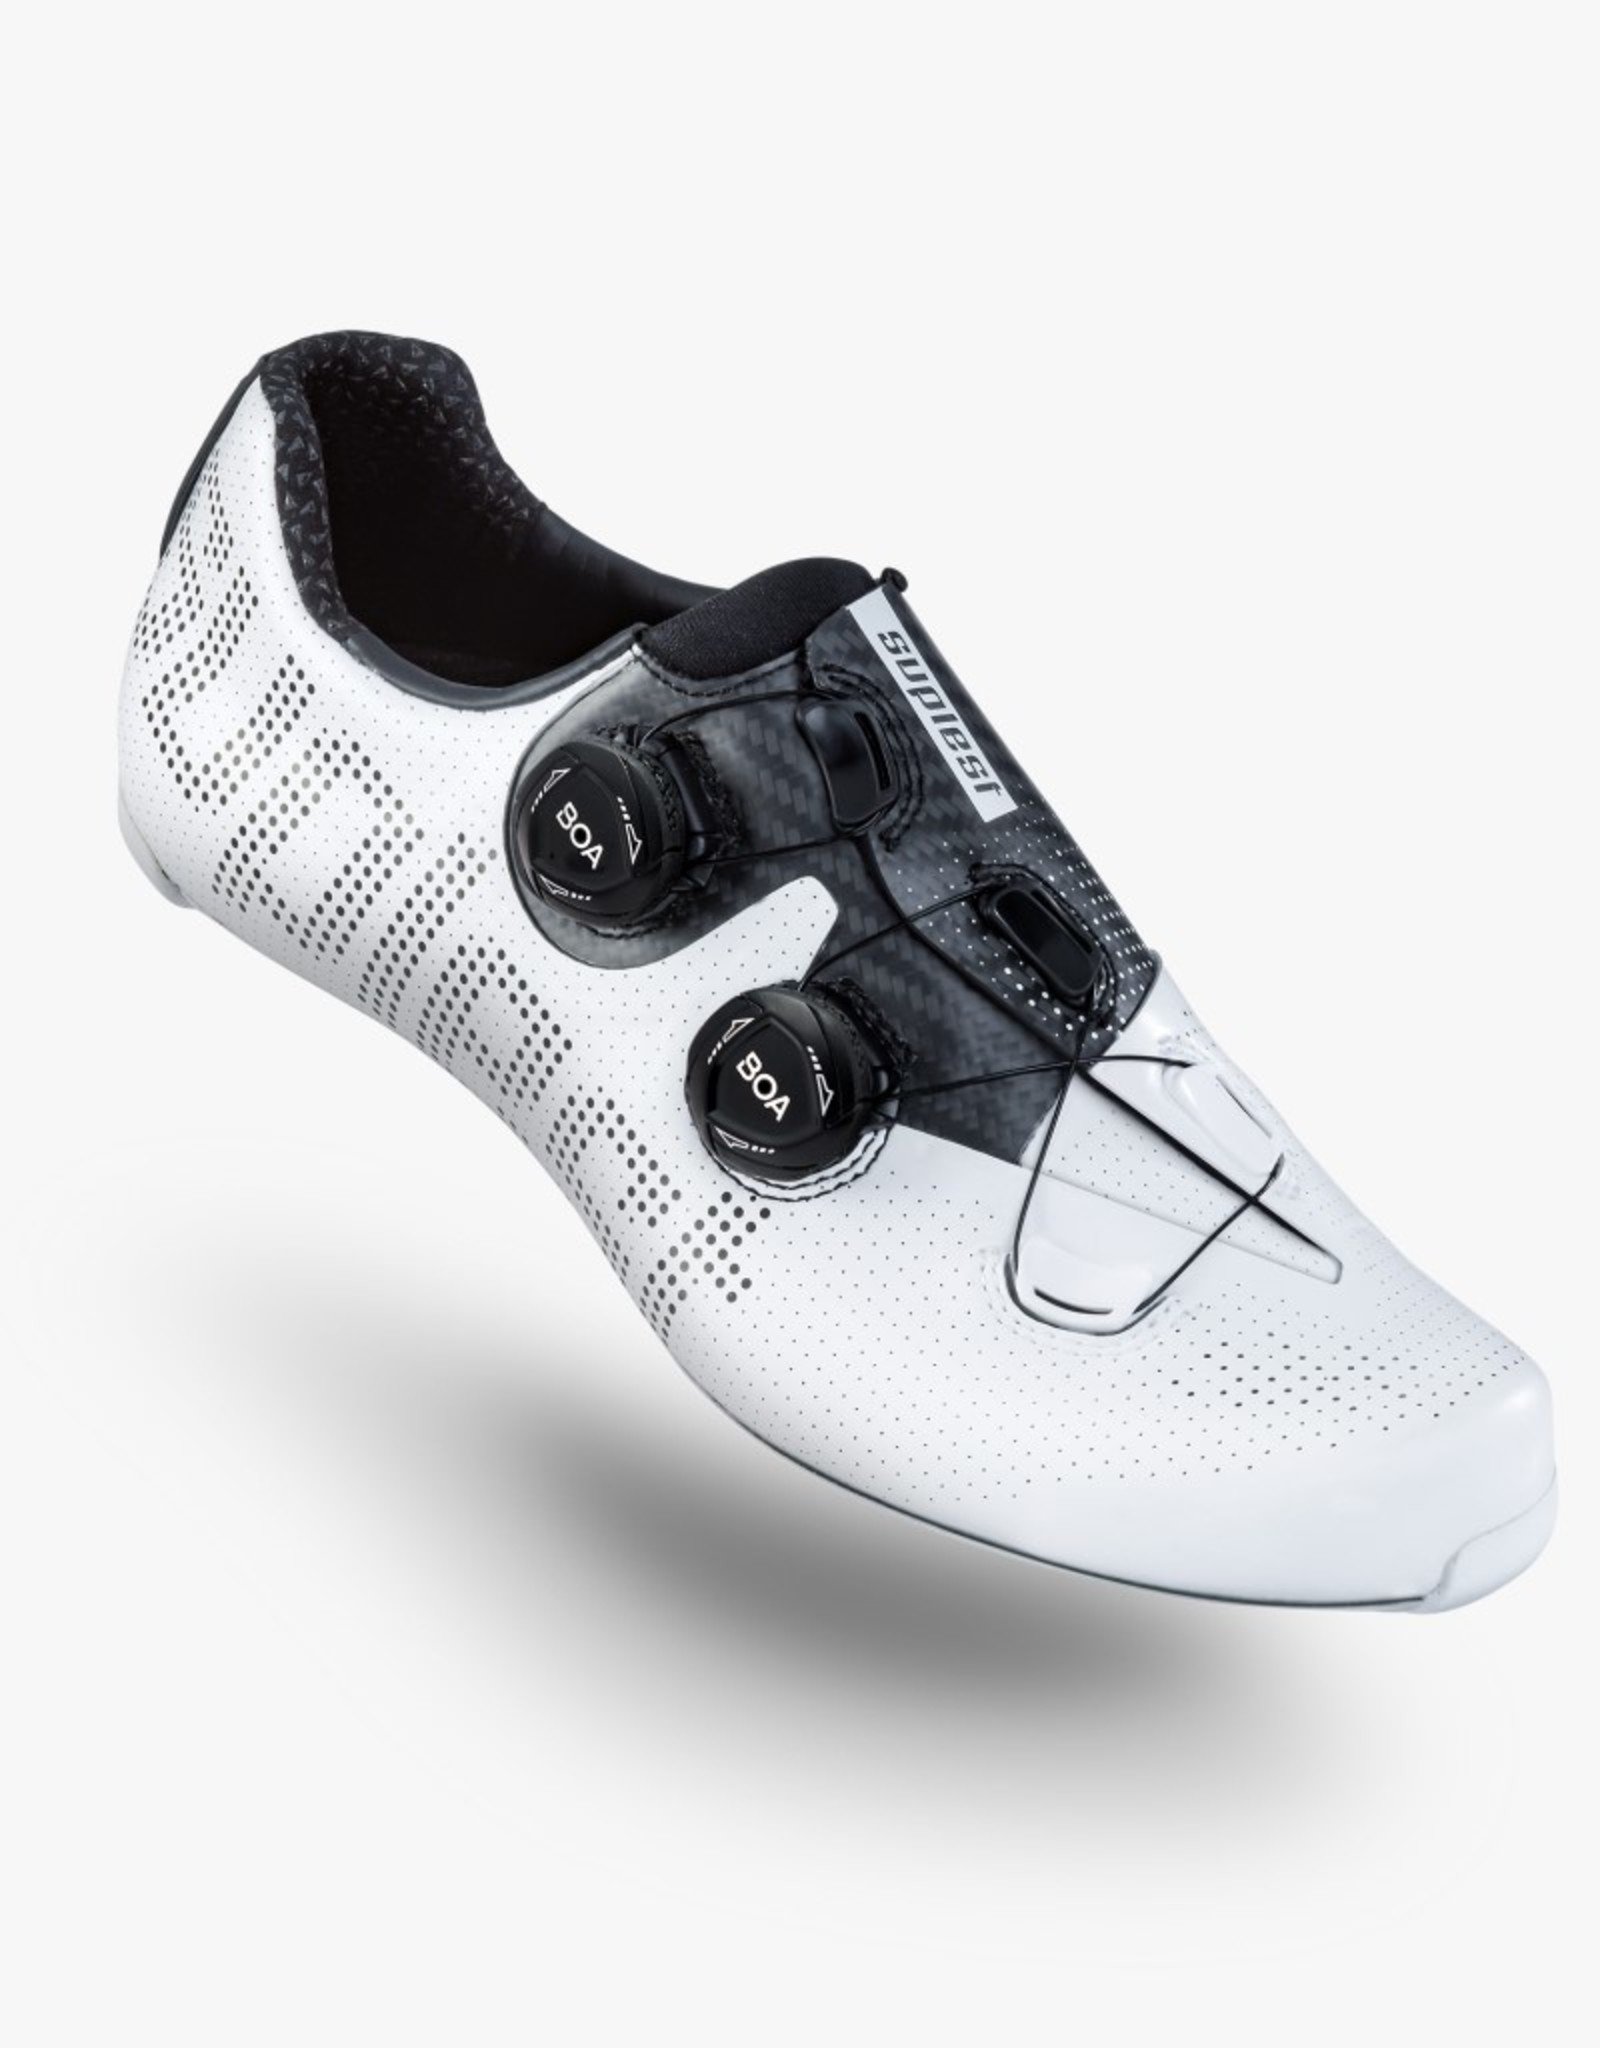 Suplest Cycling Shoes EDGE+ Road Pro - white/black